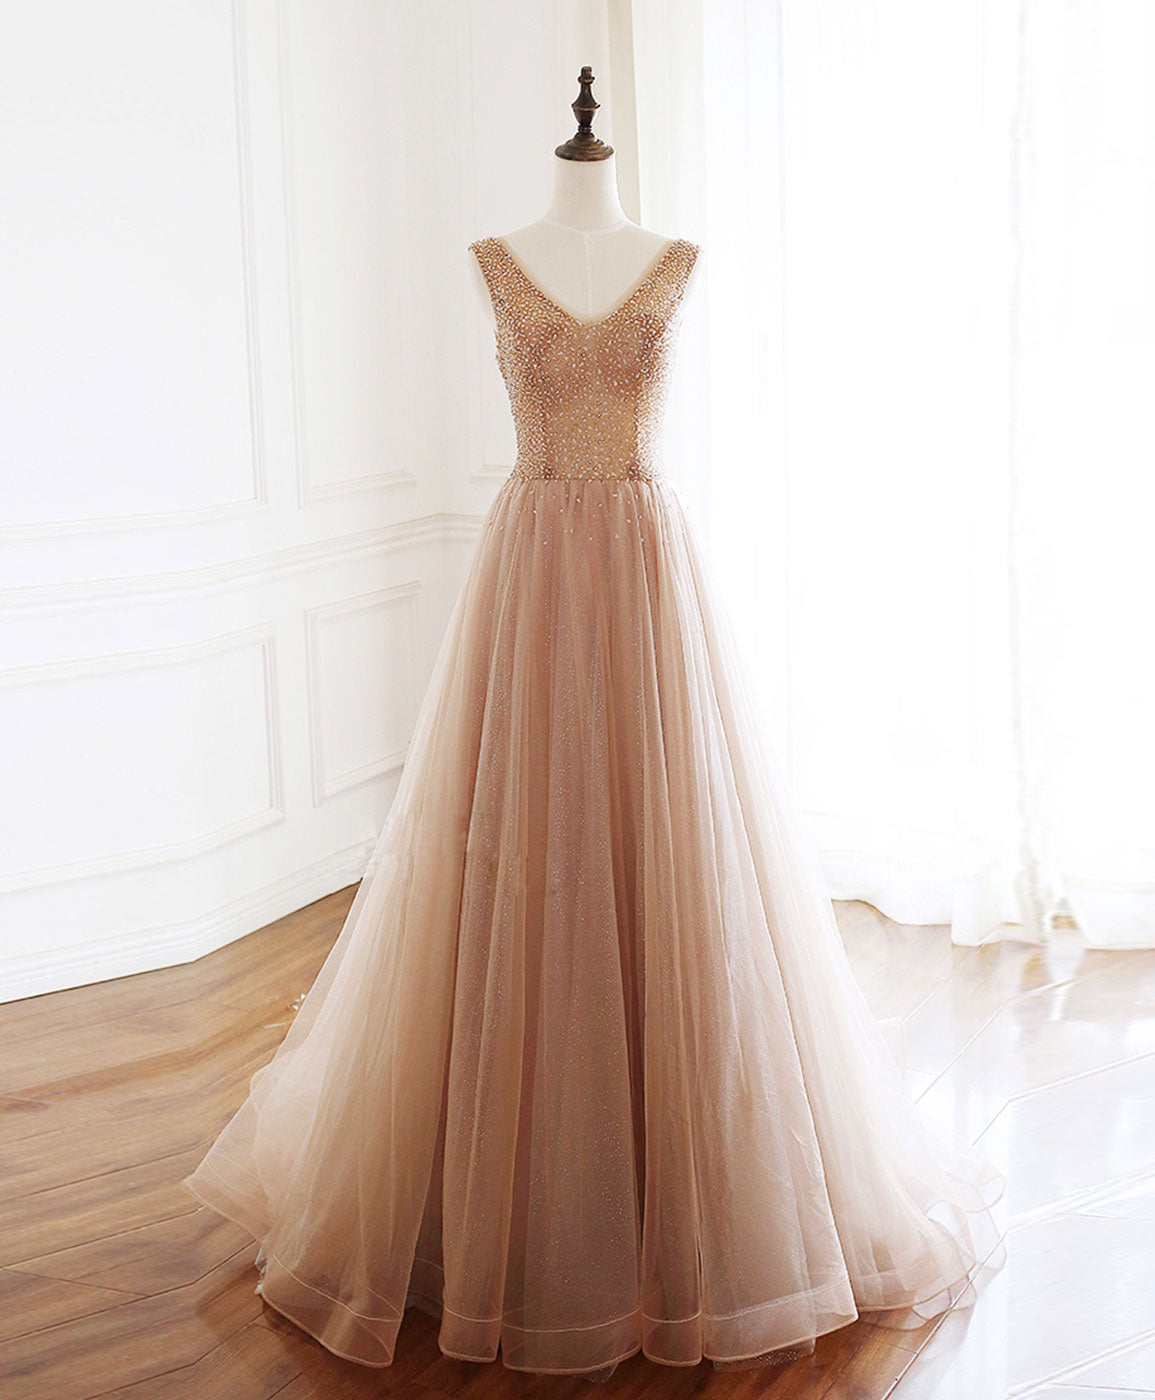 Champagne V Neck Tulle Beads Long Prom Dress Outfits For Women Evening Dress